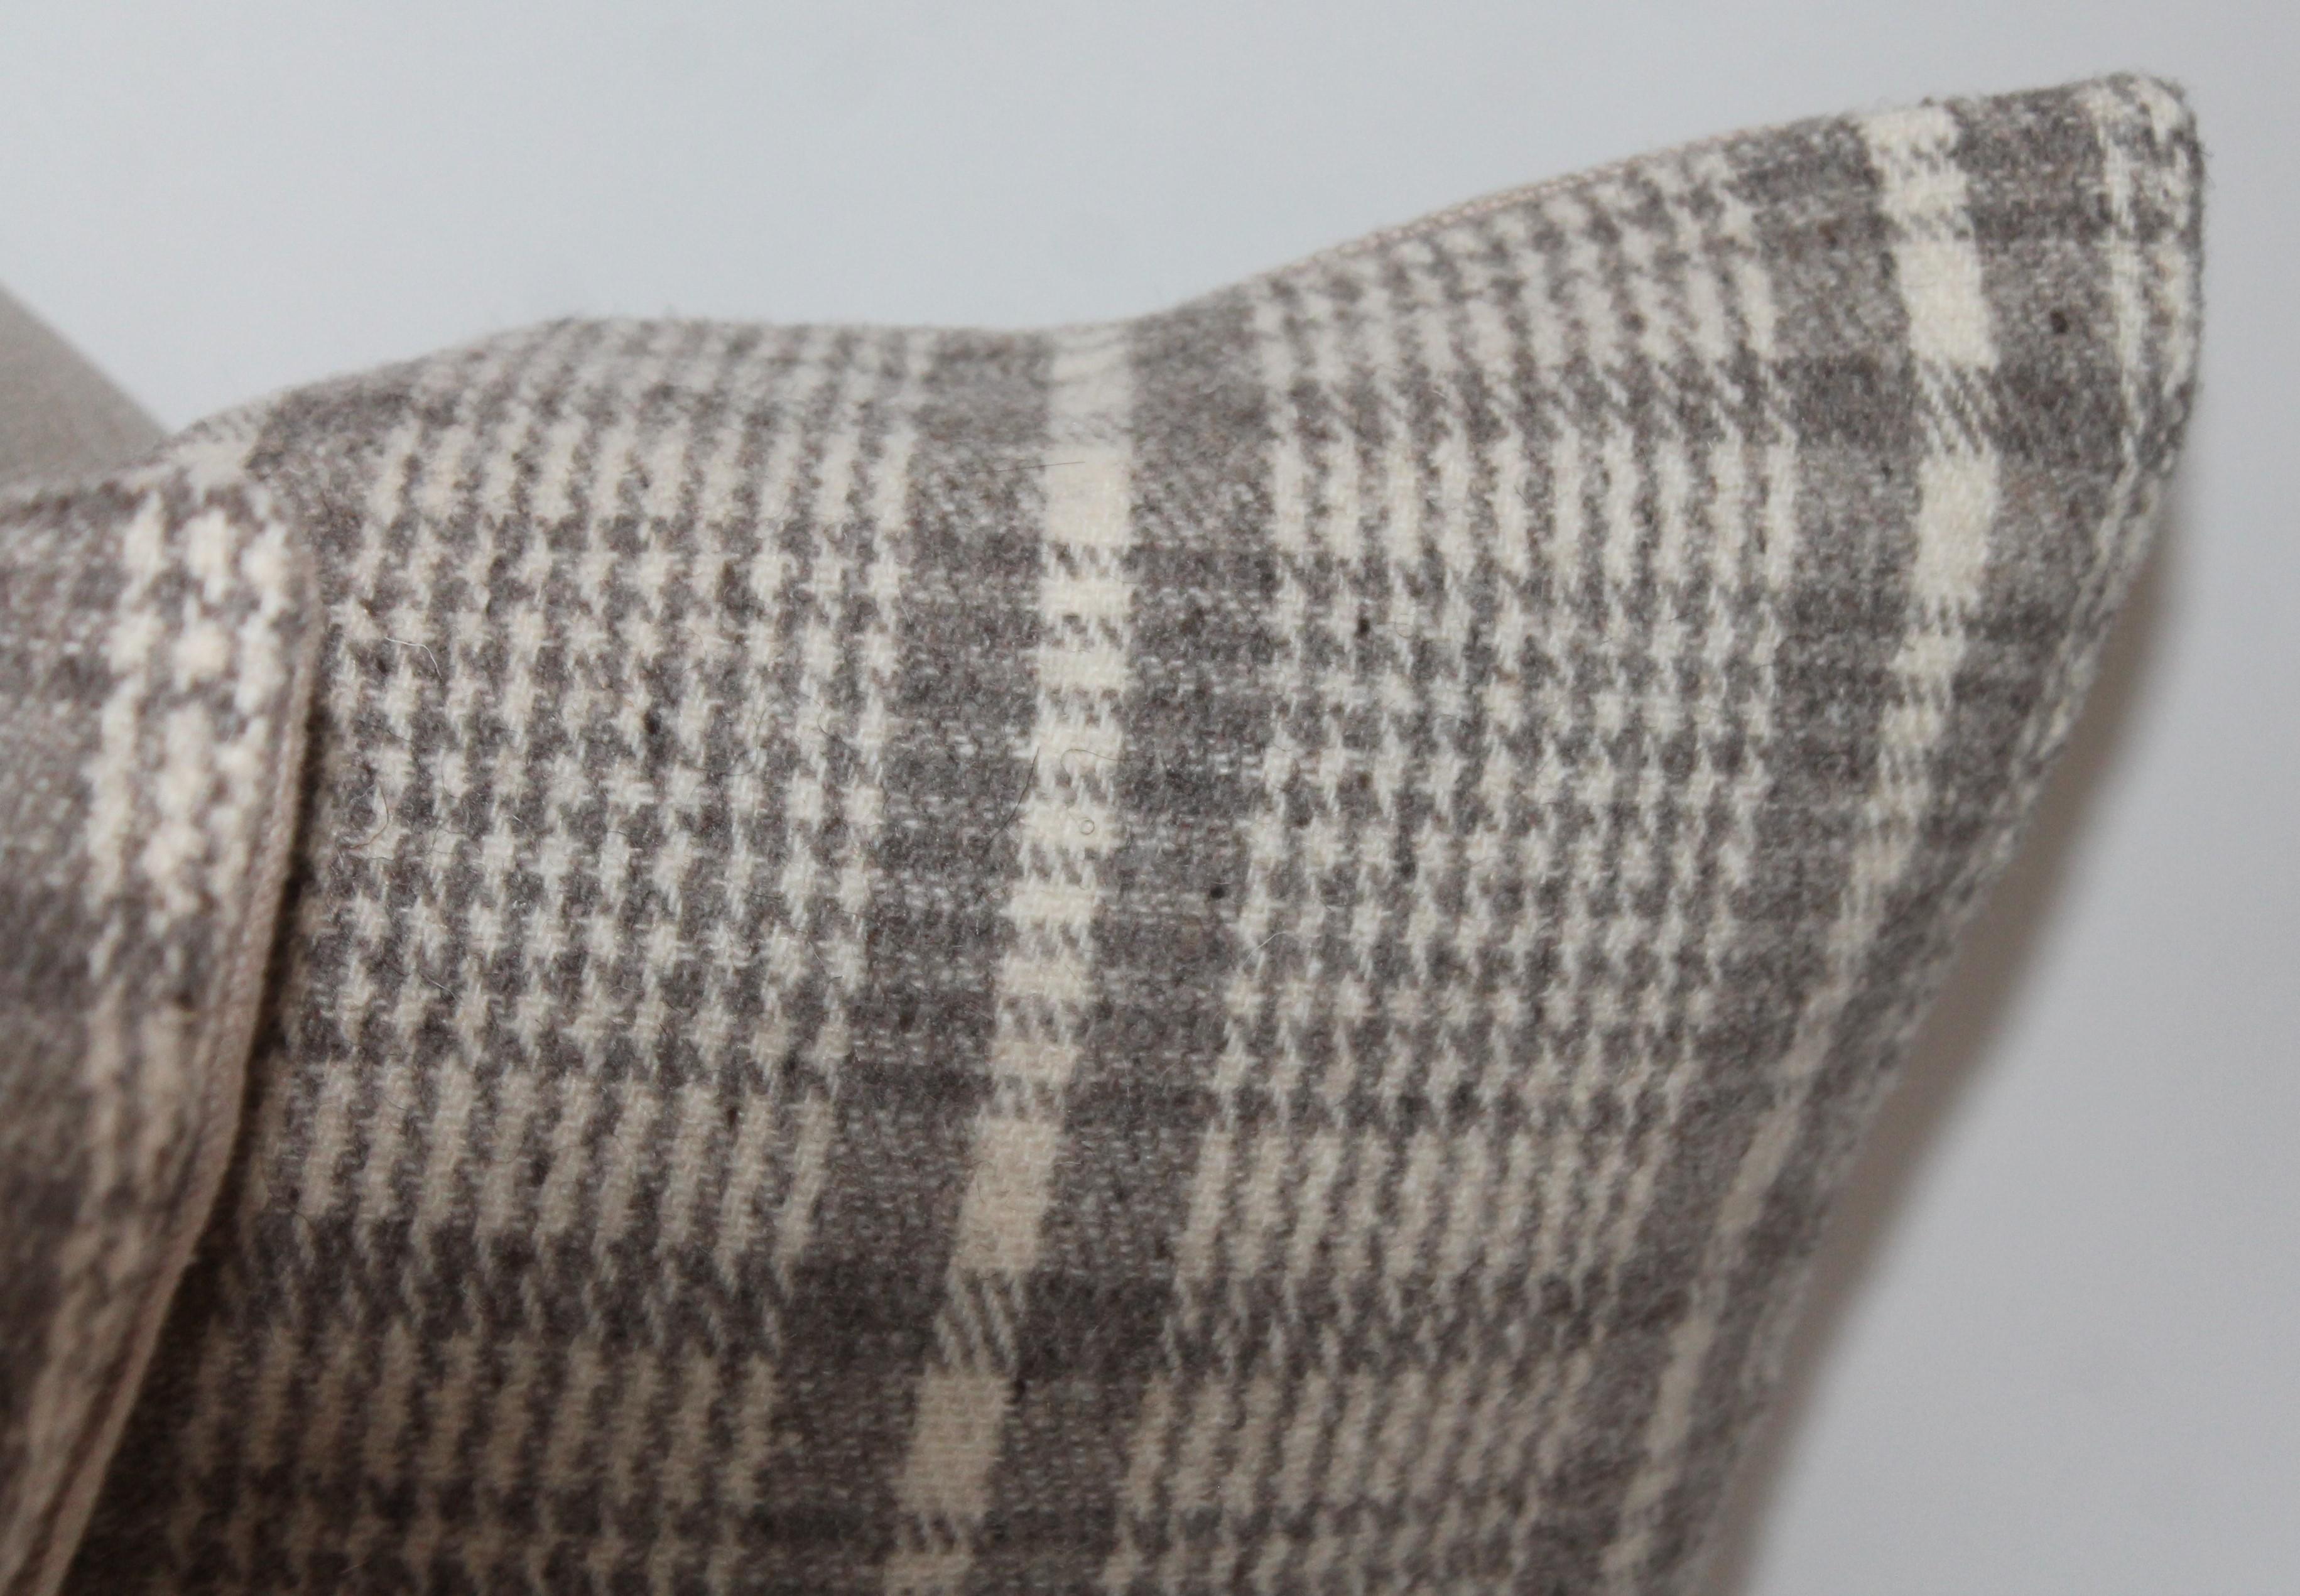 This collection of the four handwoven saddle blanket pillows are in fine condition with a grey linen backings. The soft wool face is fine to the touch. Sold as a collection of four.